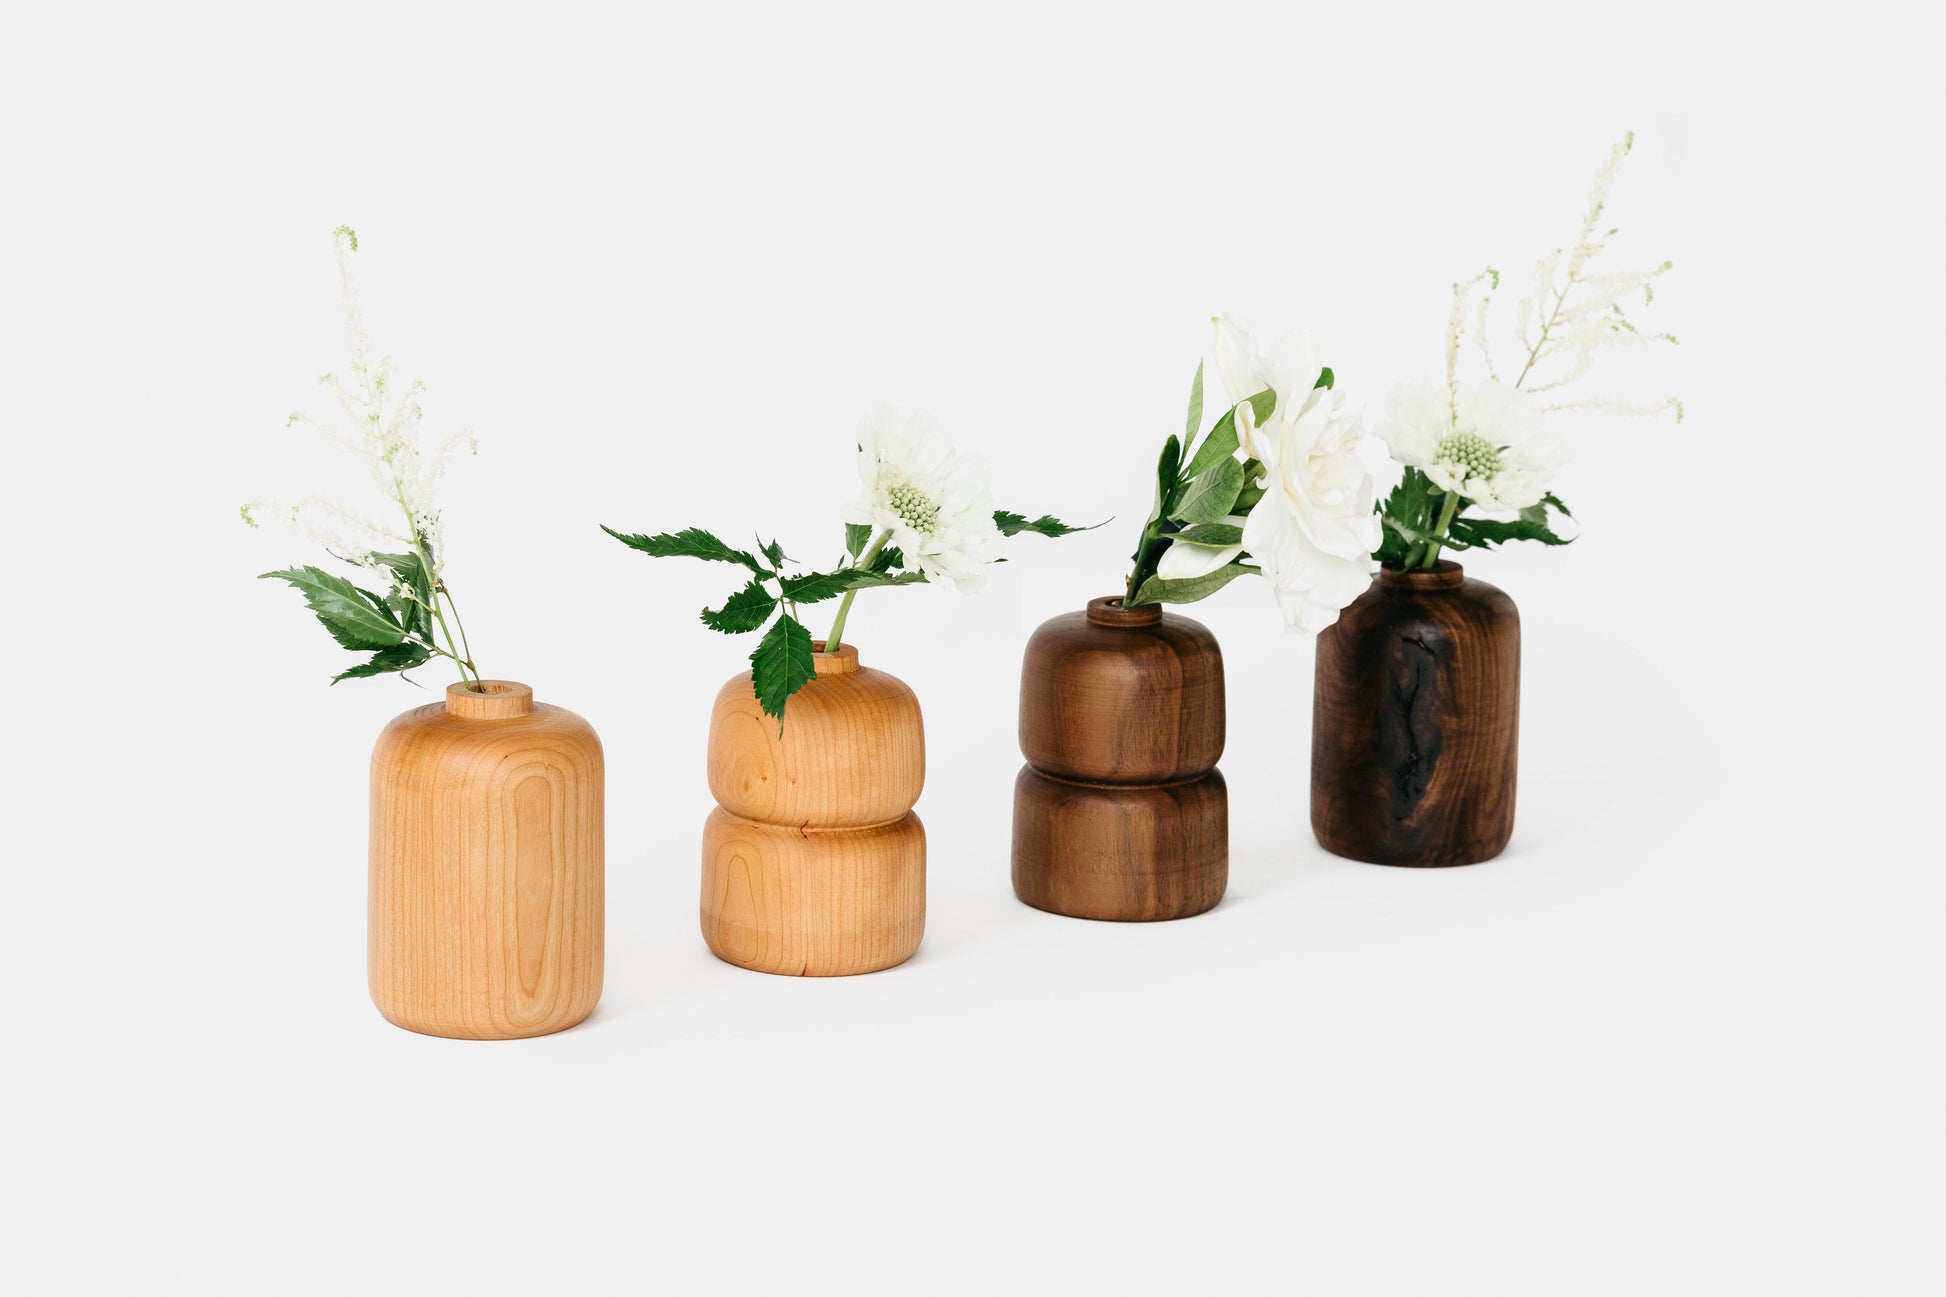 Collection of cherry and walnut bud vases holding flowers. By Melanie Abrantes Designs.